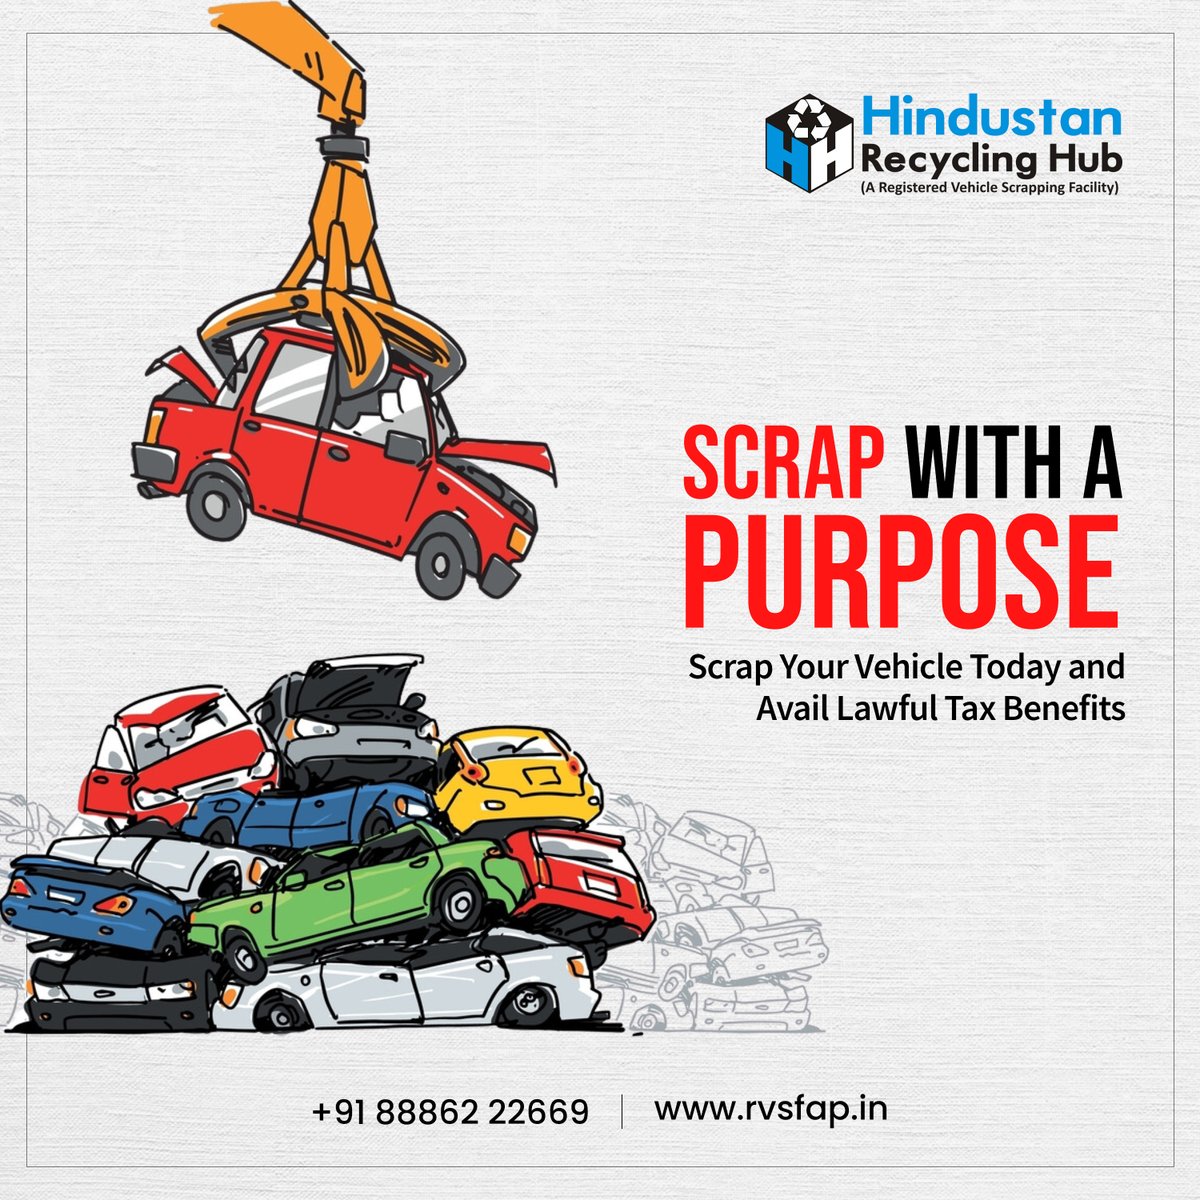 Transform your scrap into opportunity with Hindustan Recycling Hub! Unsure what to do with your old vehicle? Get an online buyer for your (ELV) (CD) and unlock a world of benefits.

Visit rvsfap.in
Call: +91 88862 22669

#hindustanrecyclehub #recycle #scrap #india